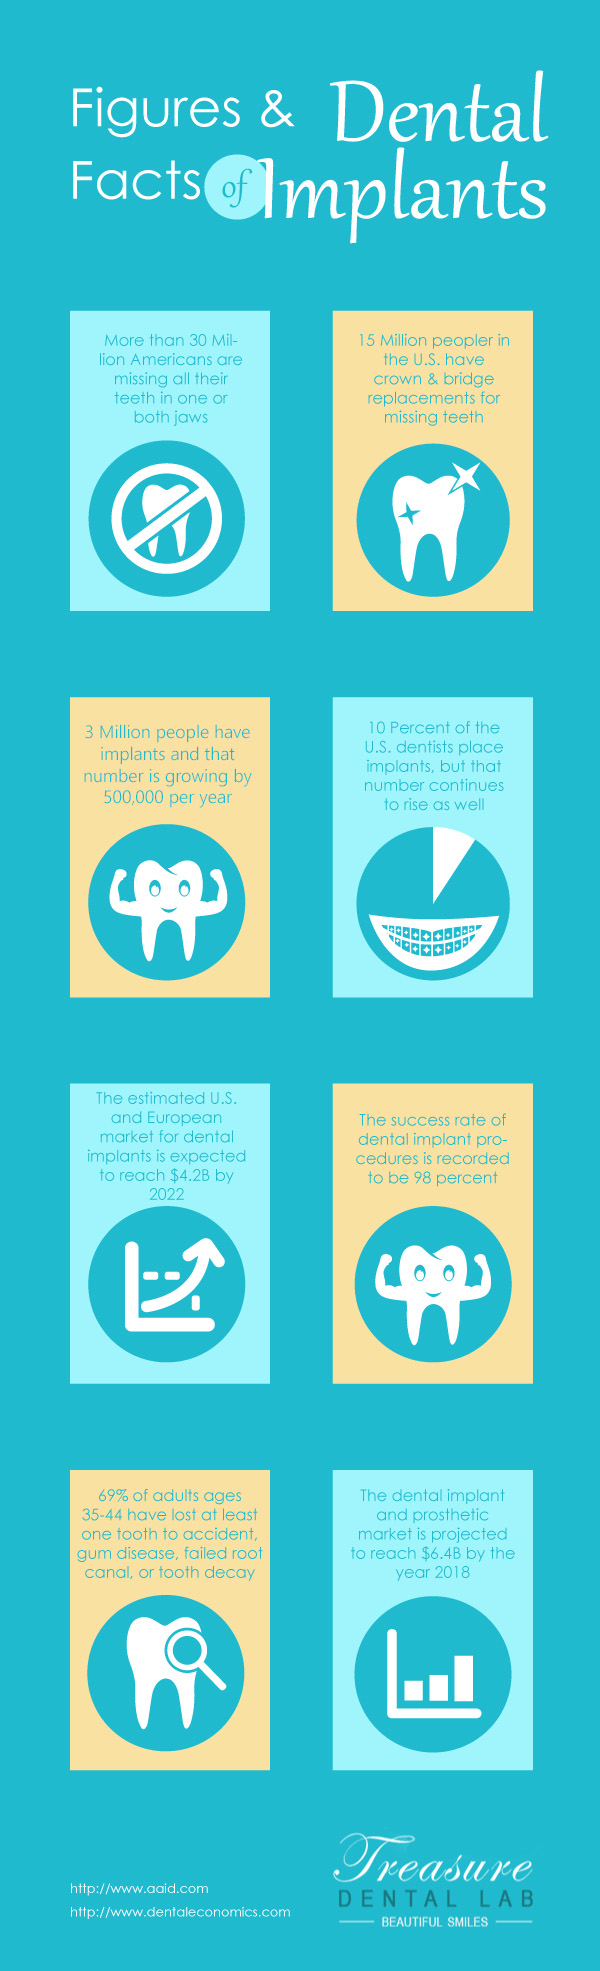 dental implant facts and figures